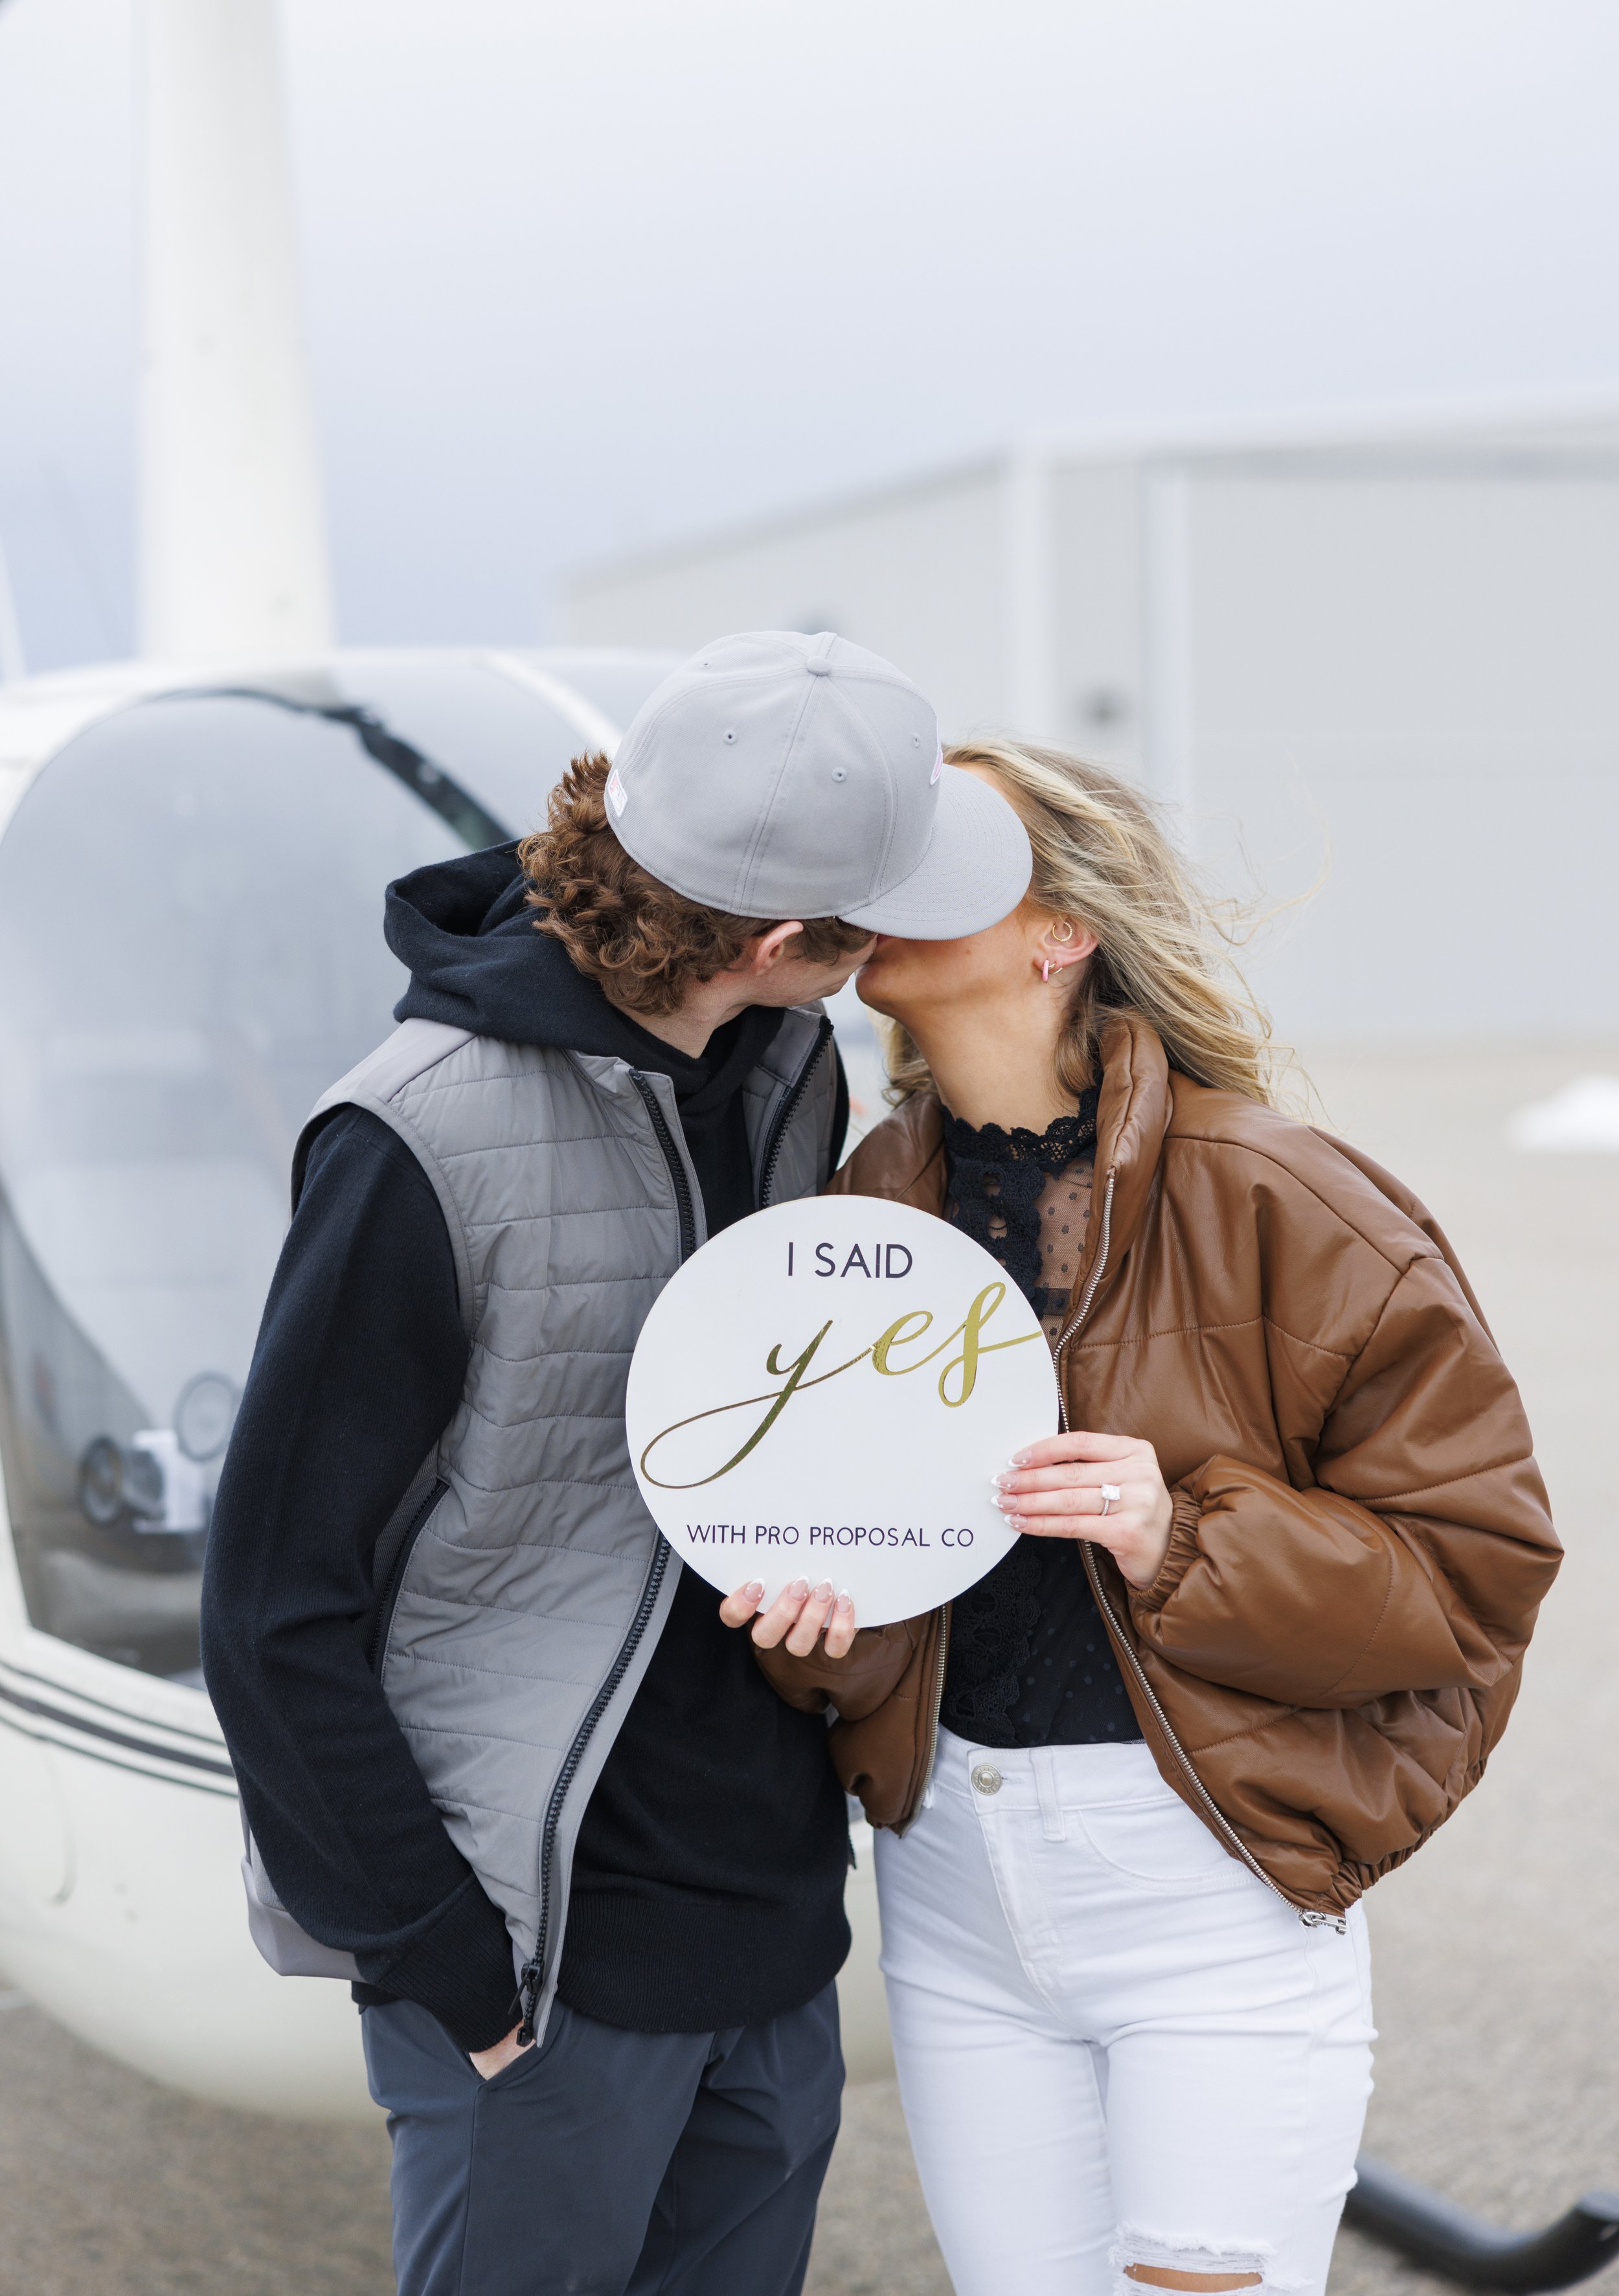  A newly engaged couple holds up a wooden sign with the words "She said Yes" on them by Savanna Richardson Photography. She said yes proposal photography she said yes signs #SavannaRichardsonPhotography #SavannaRichardsonEngagements #utahproposals #h